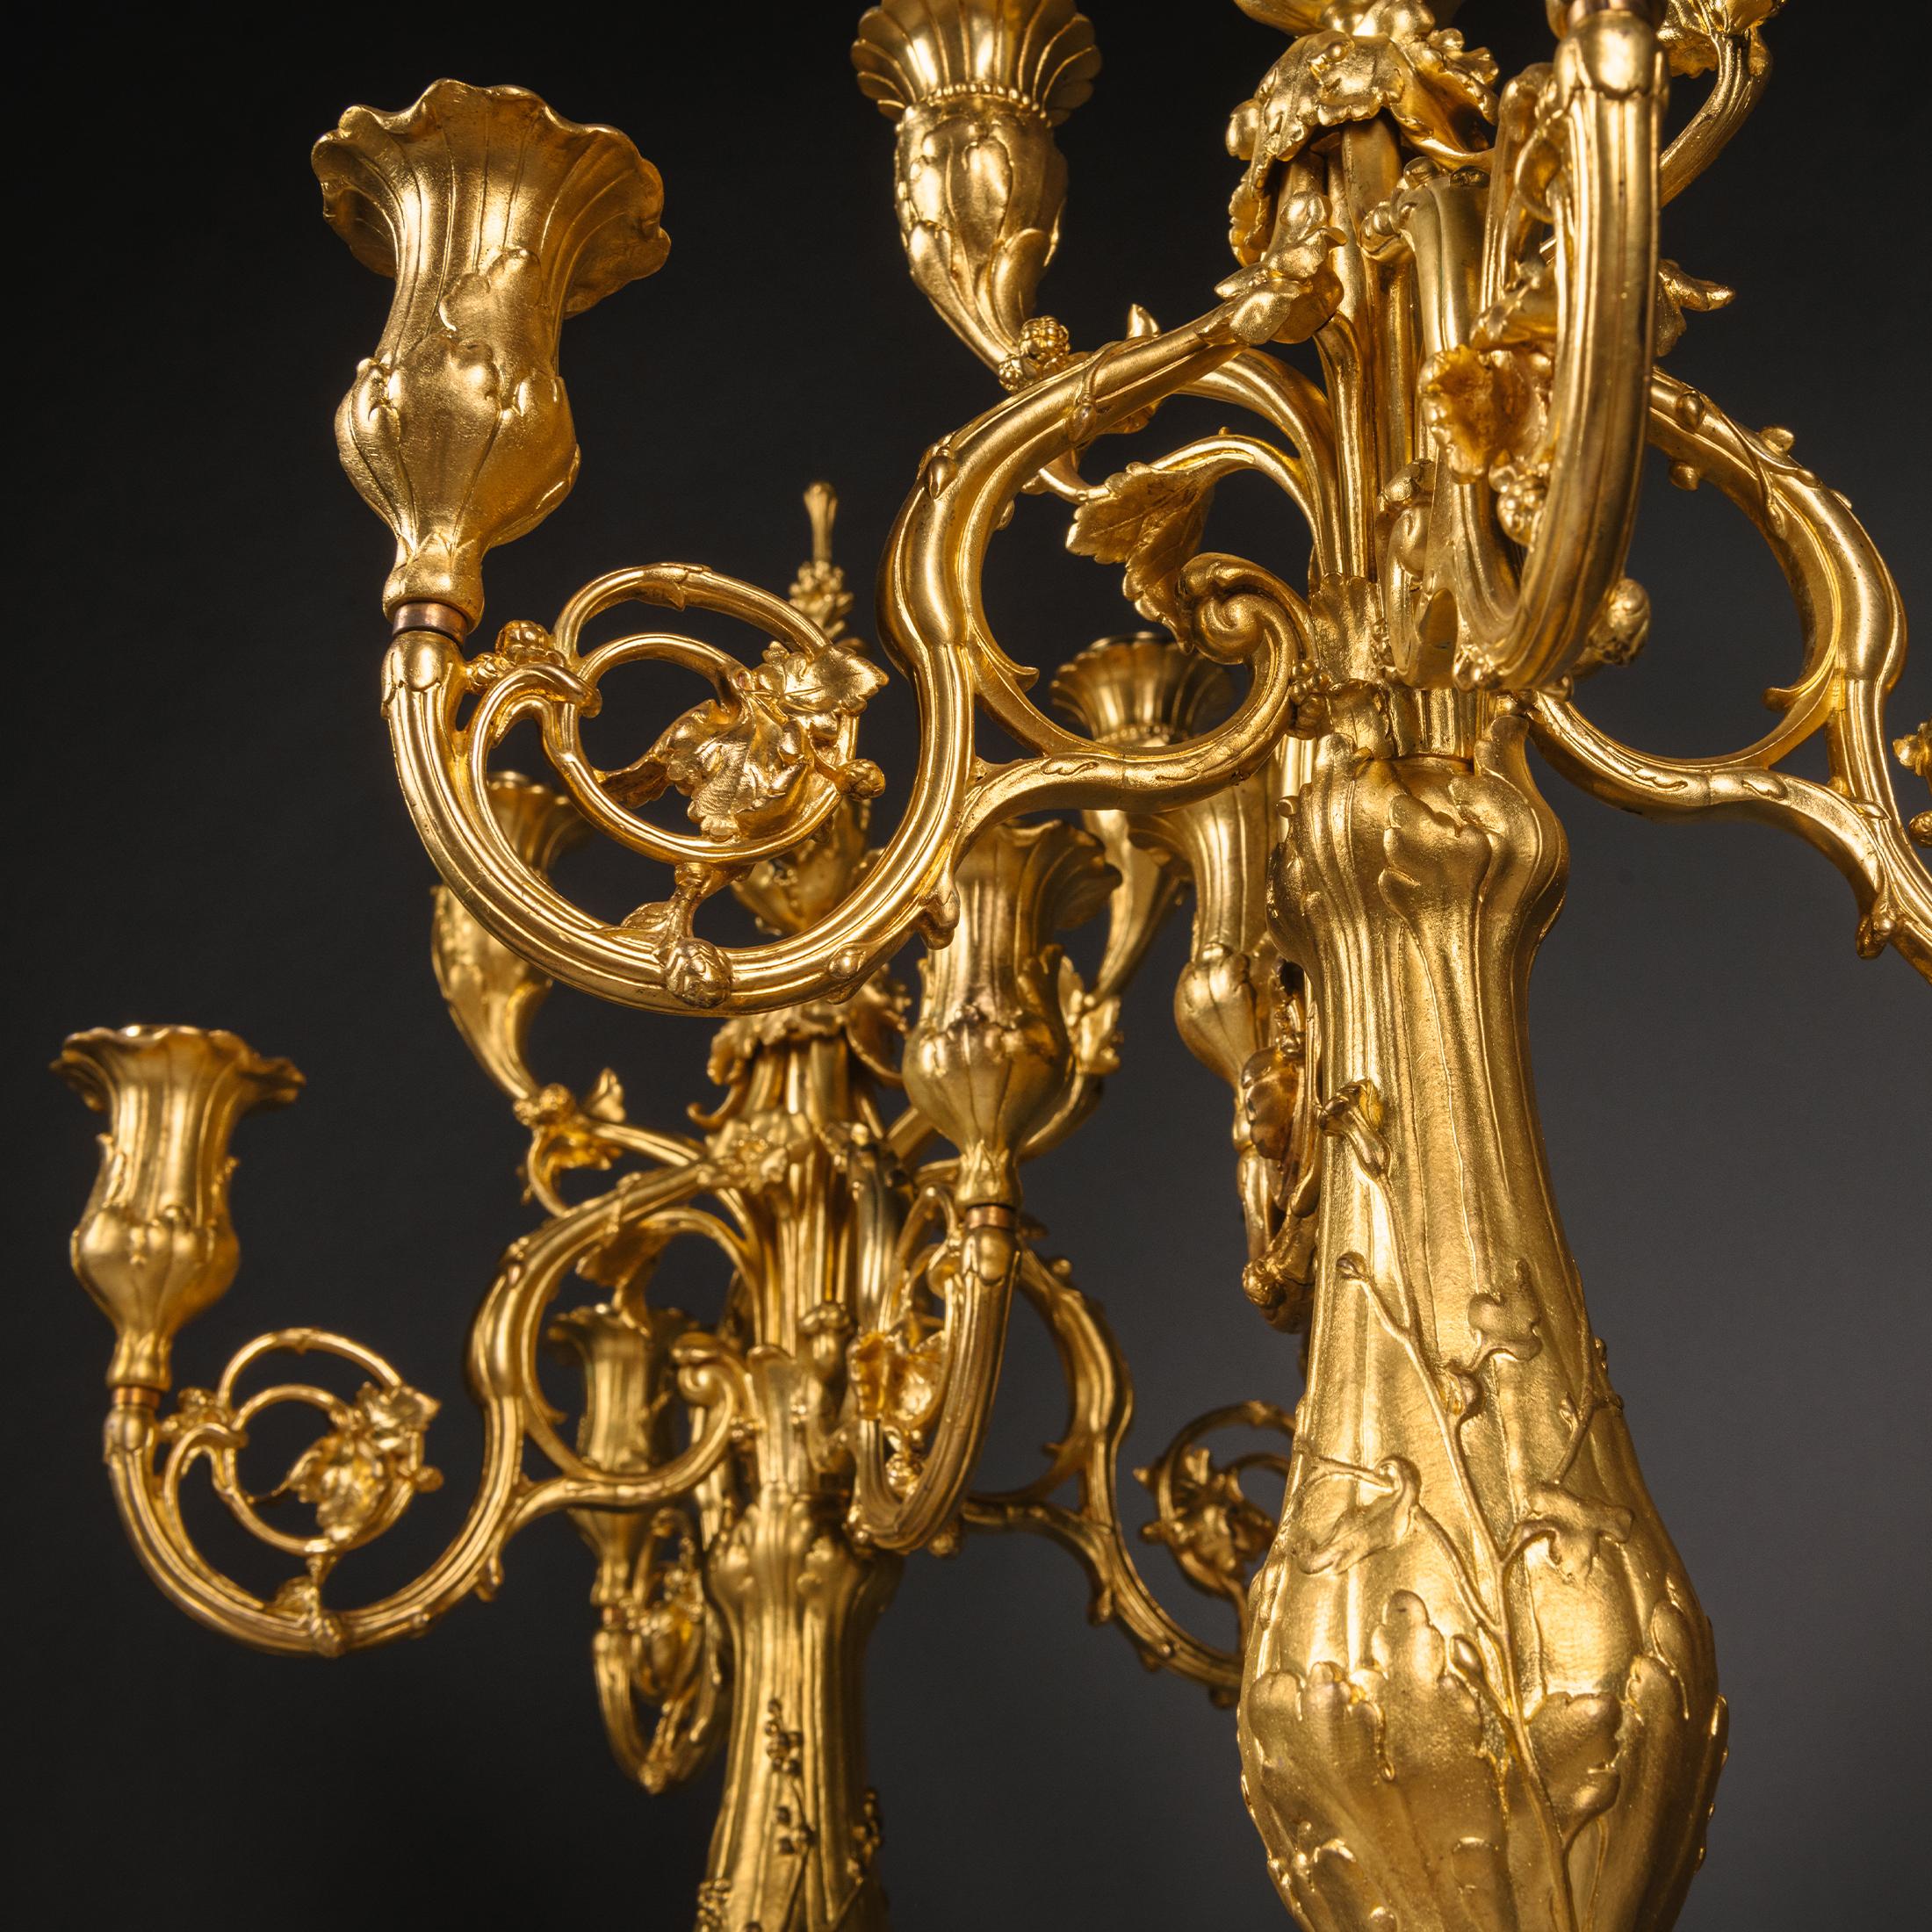 A Pair of Louis XV Style Gilt-Bornze Six-Light Candelabra by Robert Frères, Cast by Susse Frères.

Signed to the base ‘Robert Frères, à Paris’ and with the cachet stamp for ‘Editeur Susse Frères’.

This fine pair of candelabra have berried finials